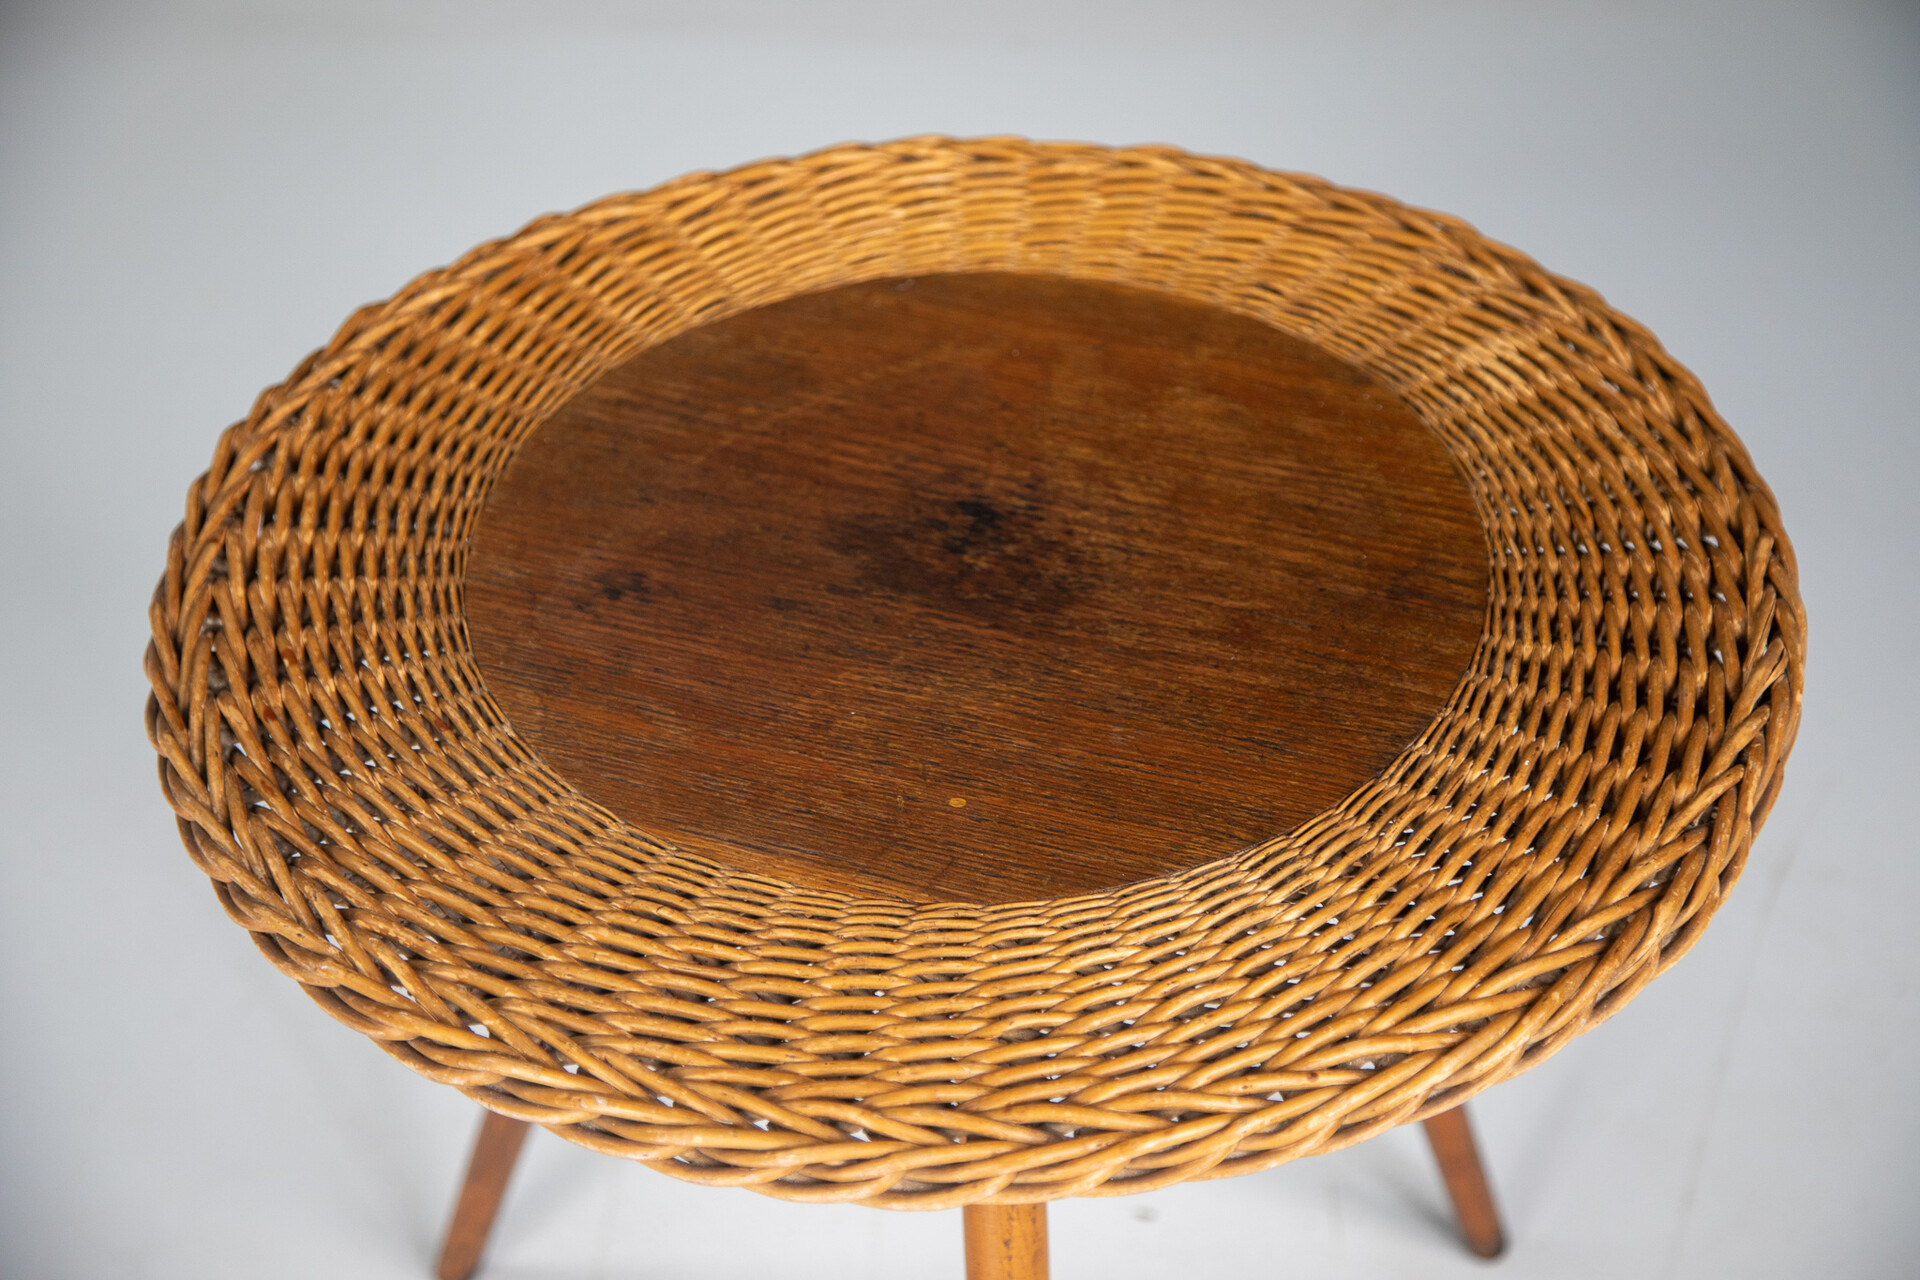 Mid century modern Wood and wicker coffee table , France 1950s Mid-20th century